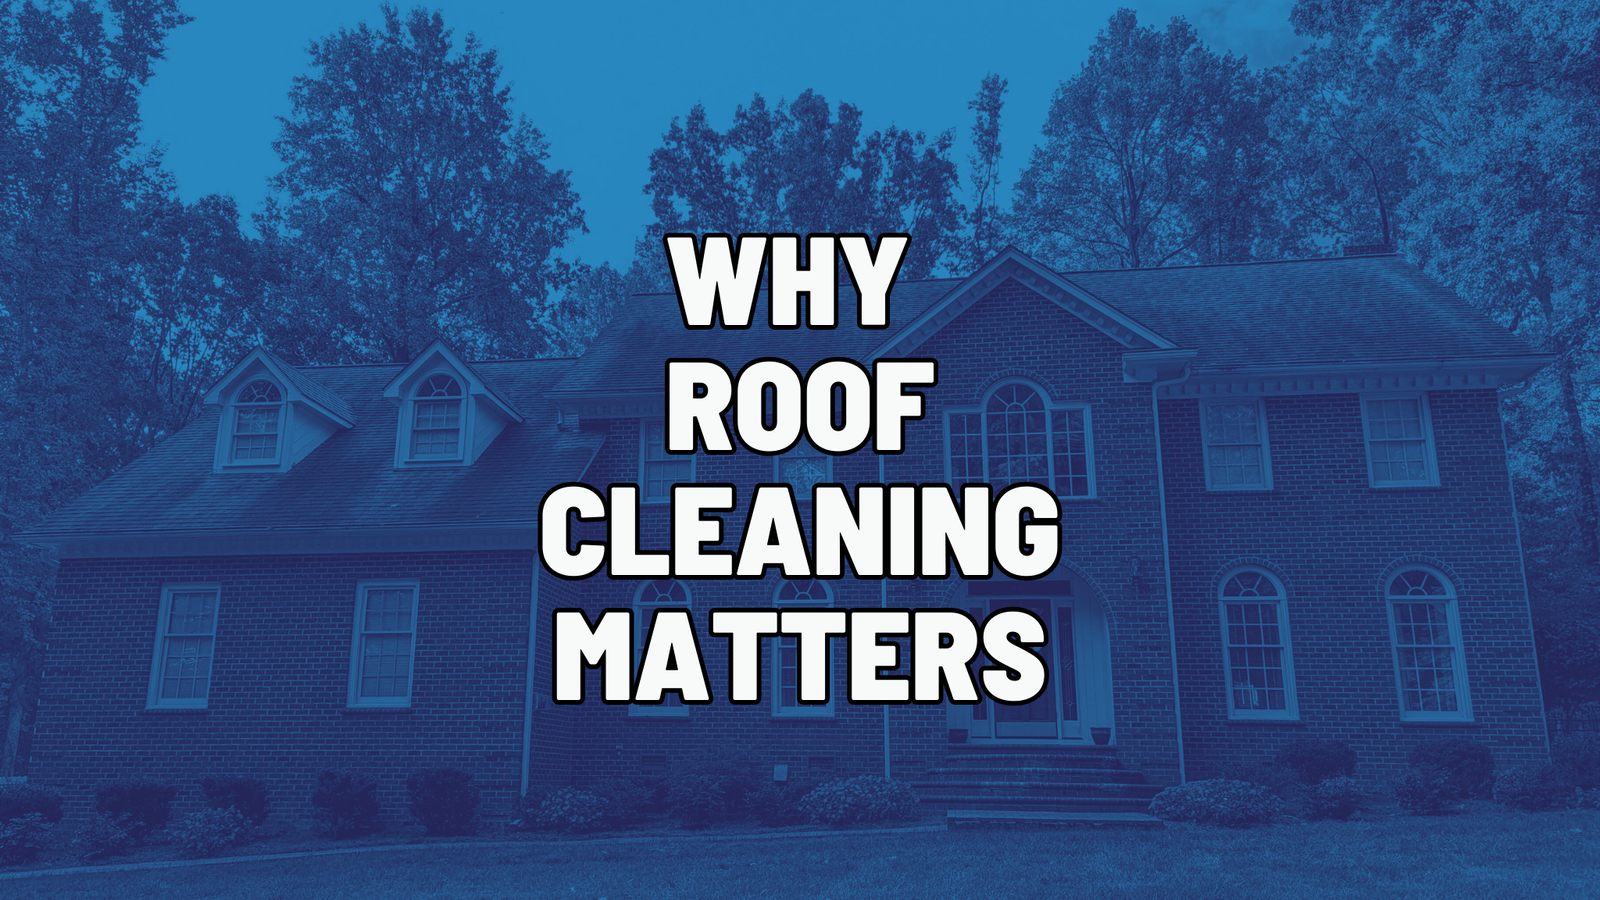 Why Roof Cleaning Matters